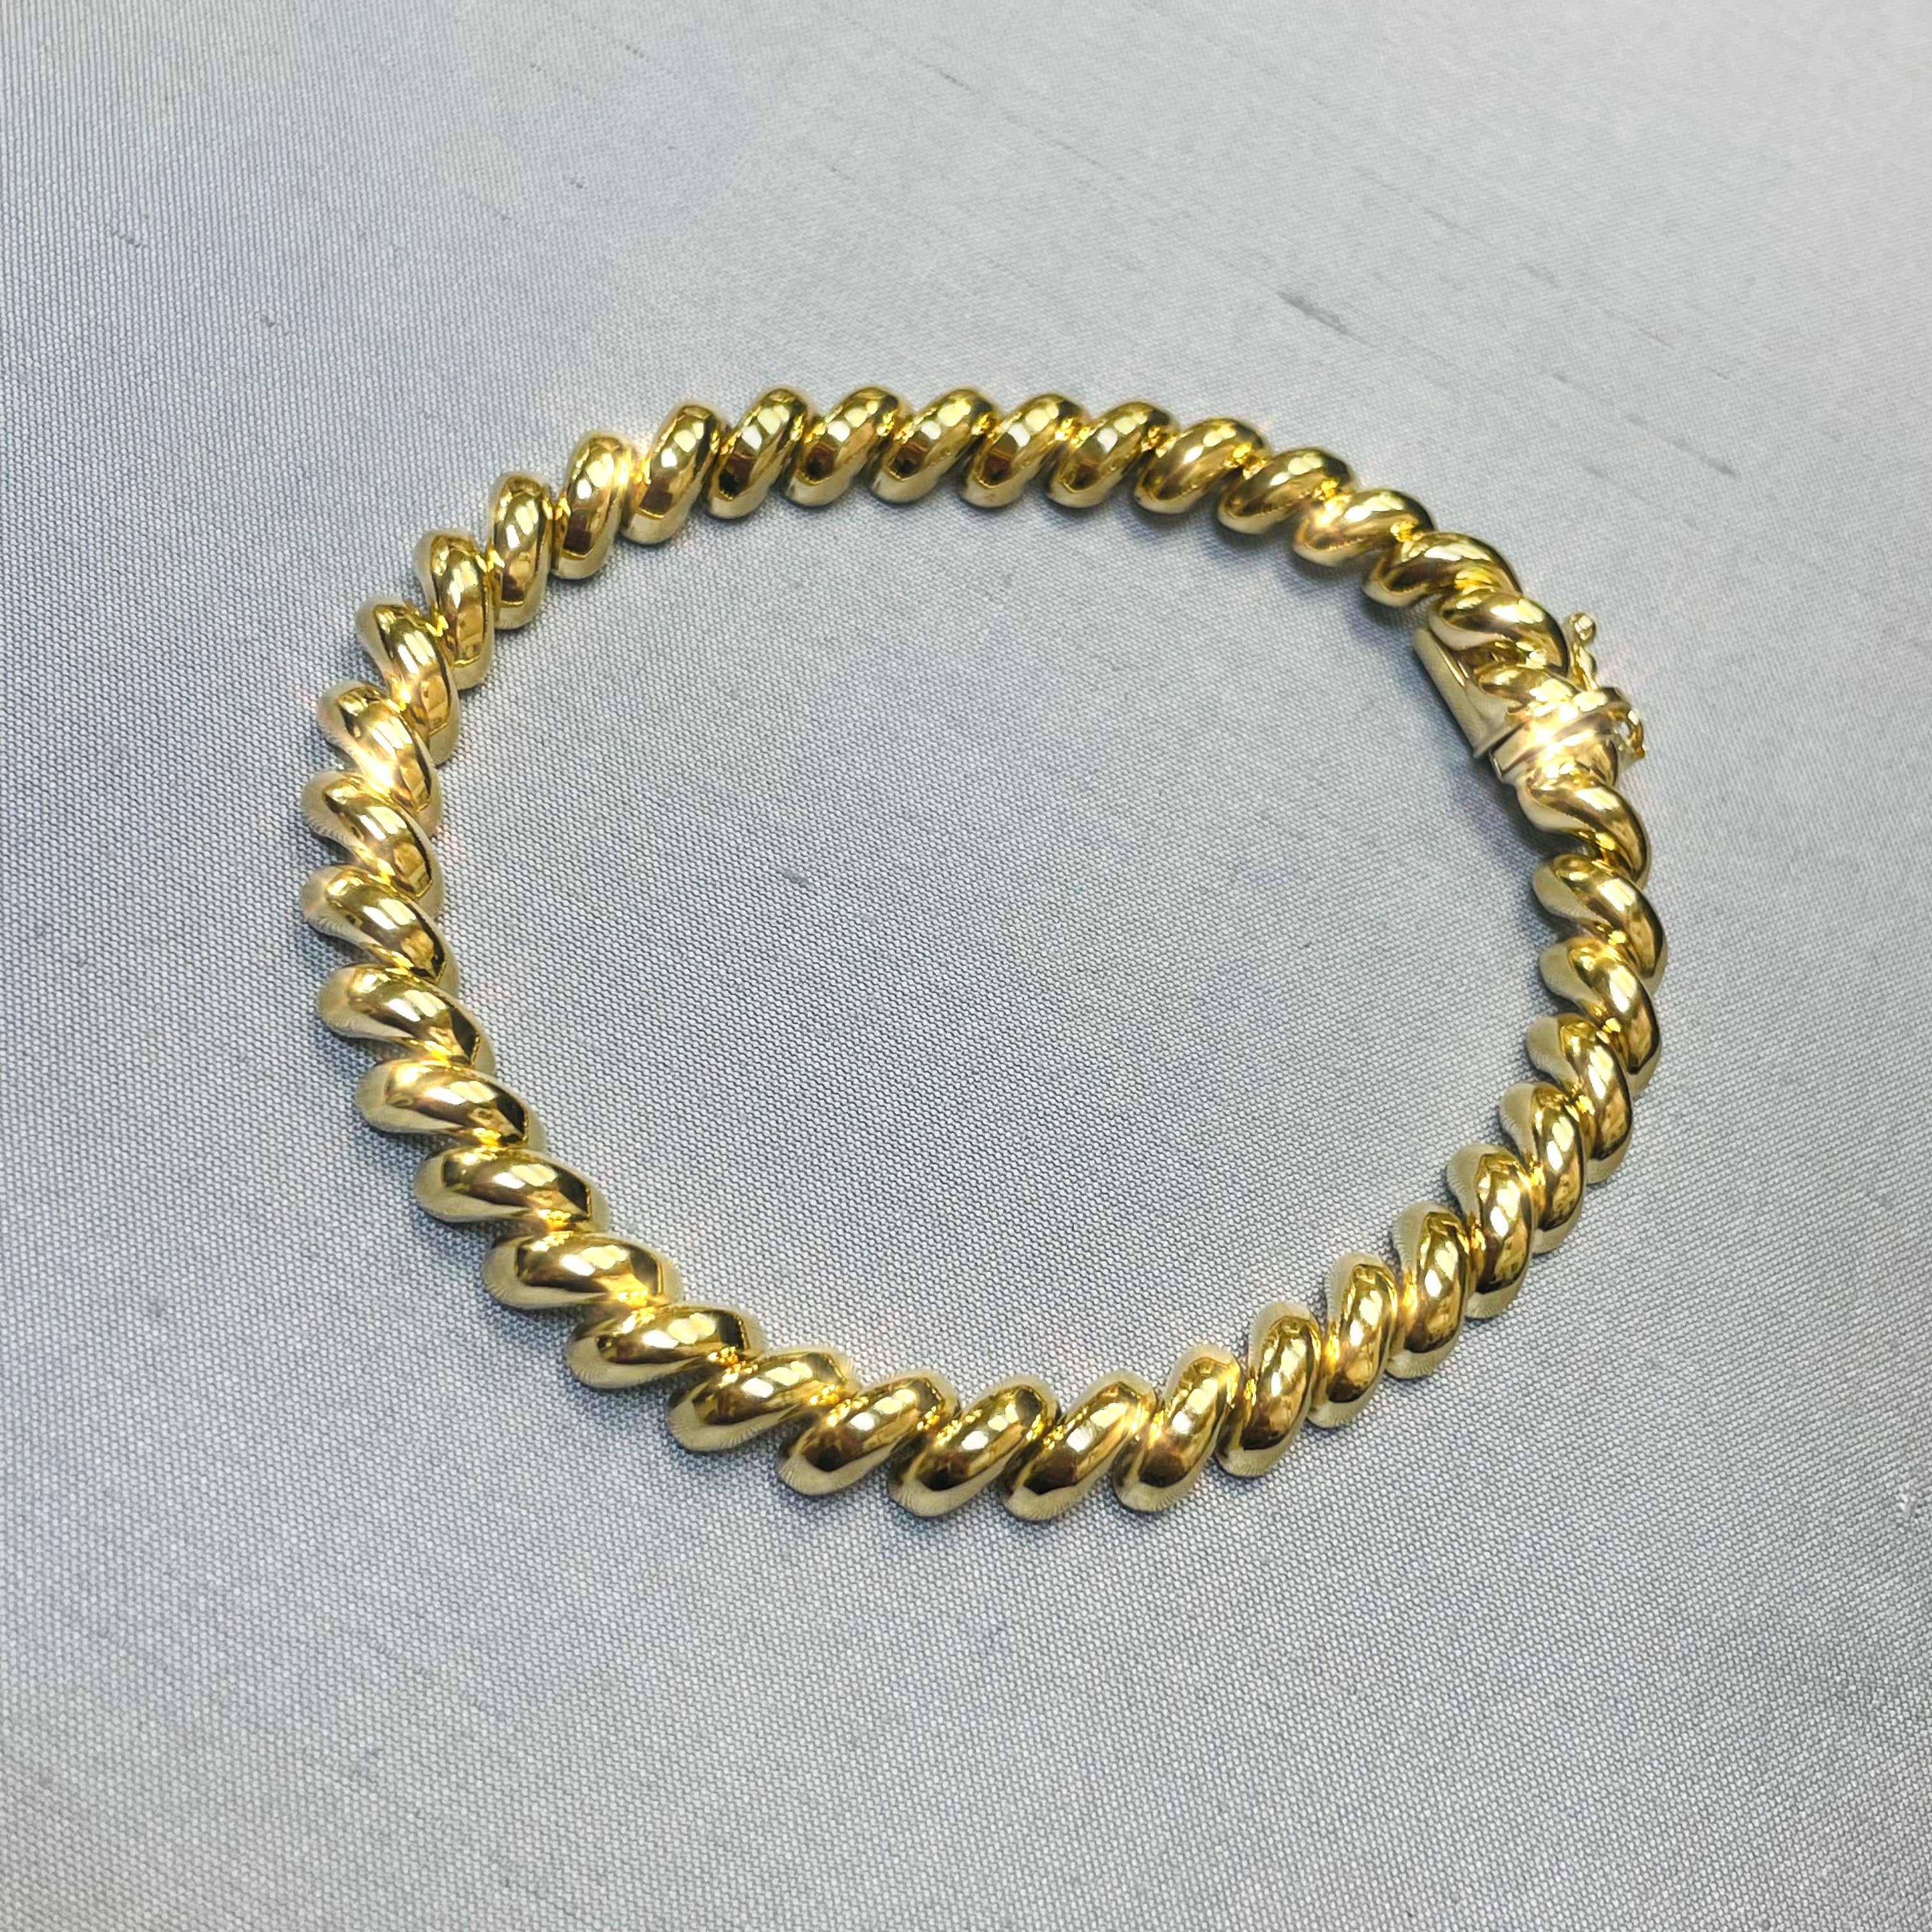 8” 7mm Macaroni San Marco Link Bracelet in Solid 14K Yellow Gold